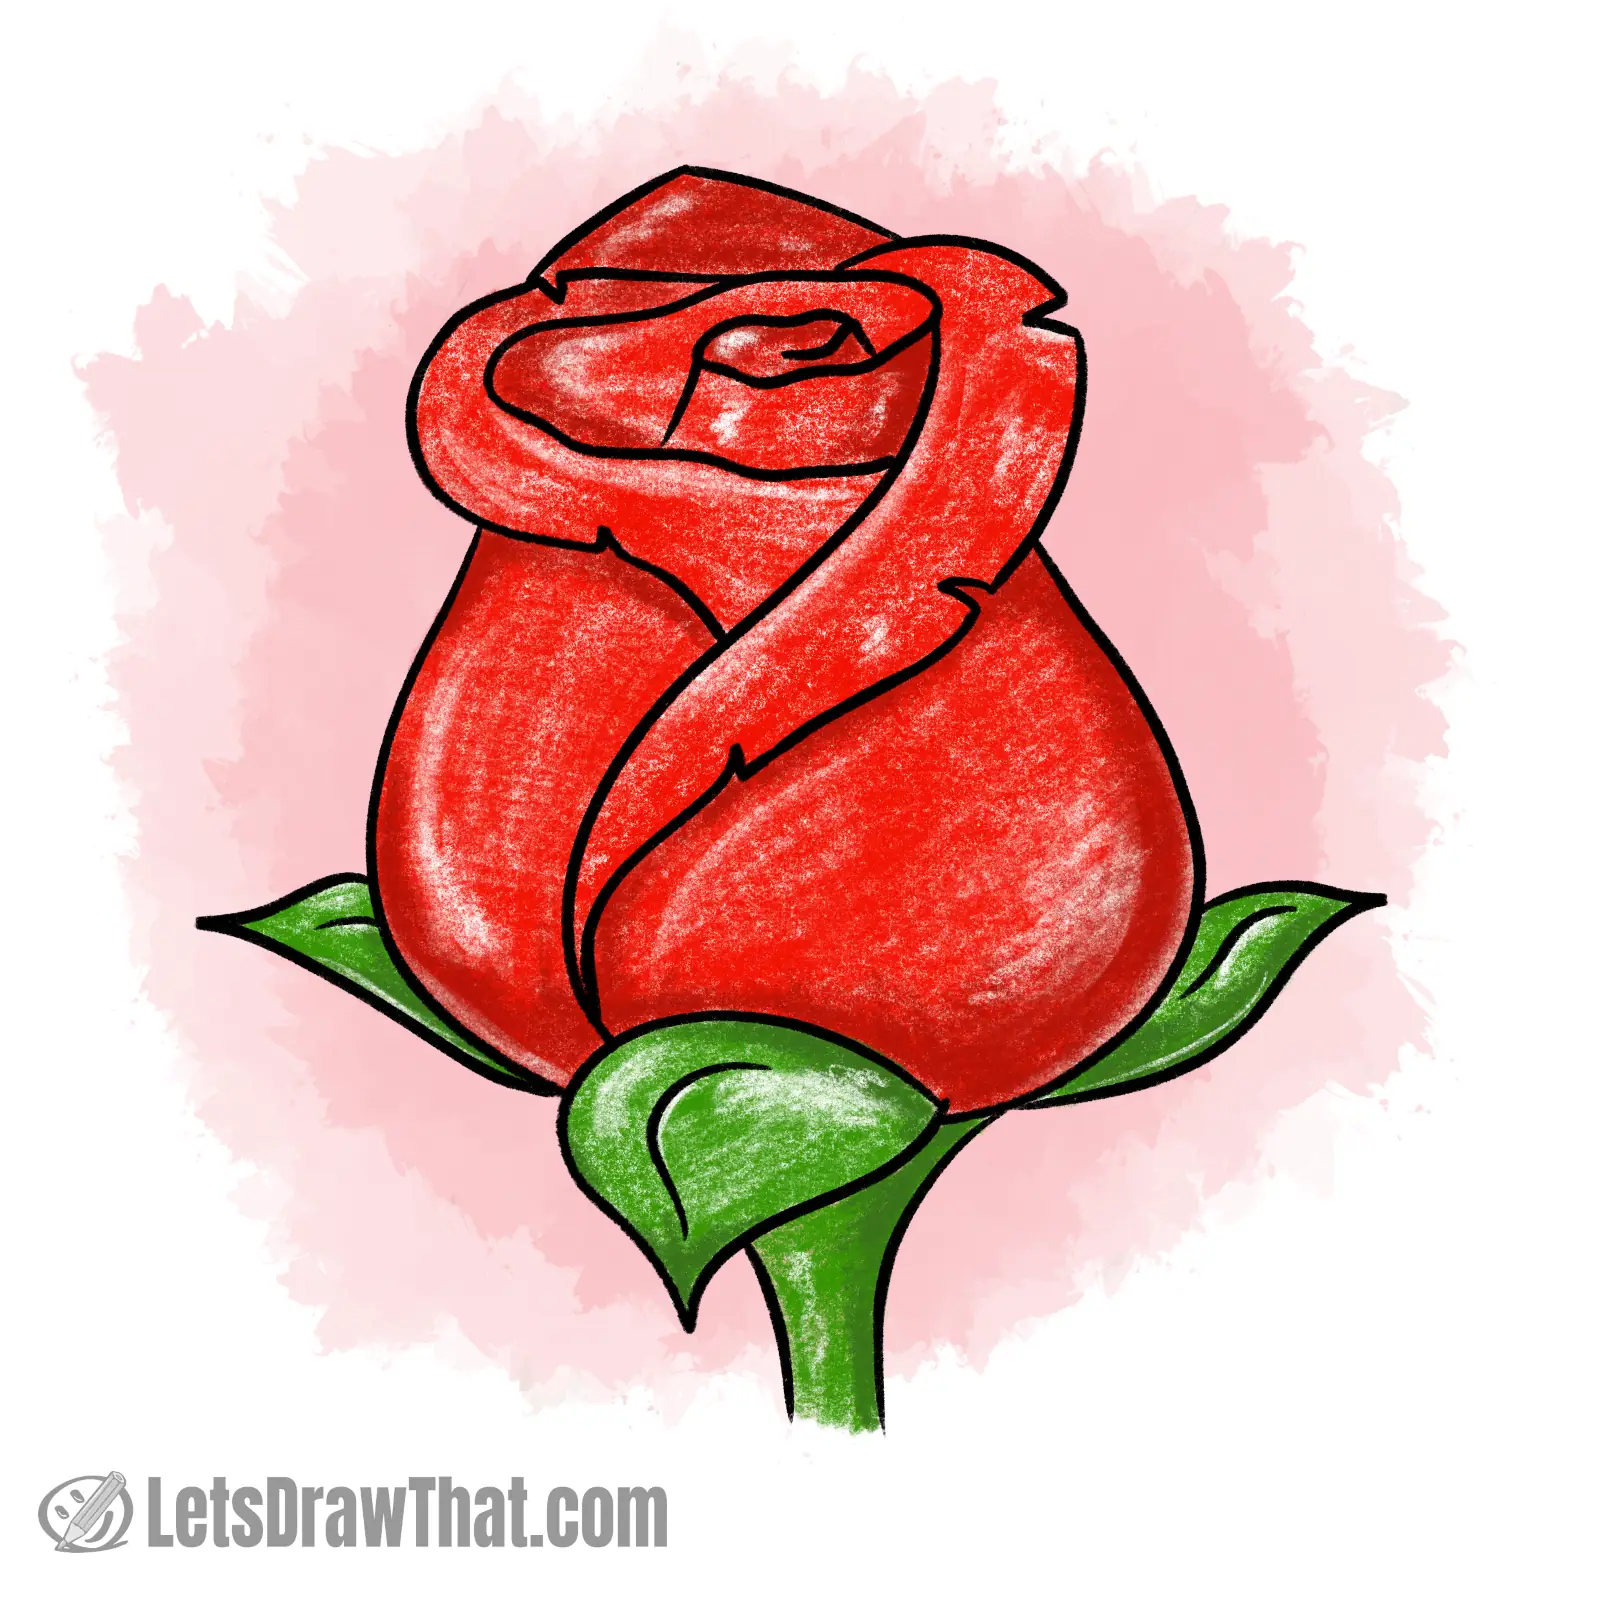 How to draw a rose: finished drawing colored-in